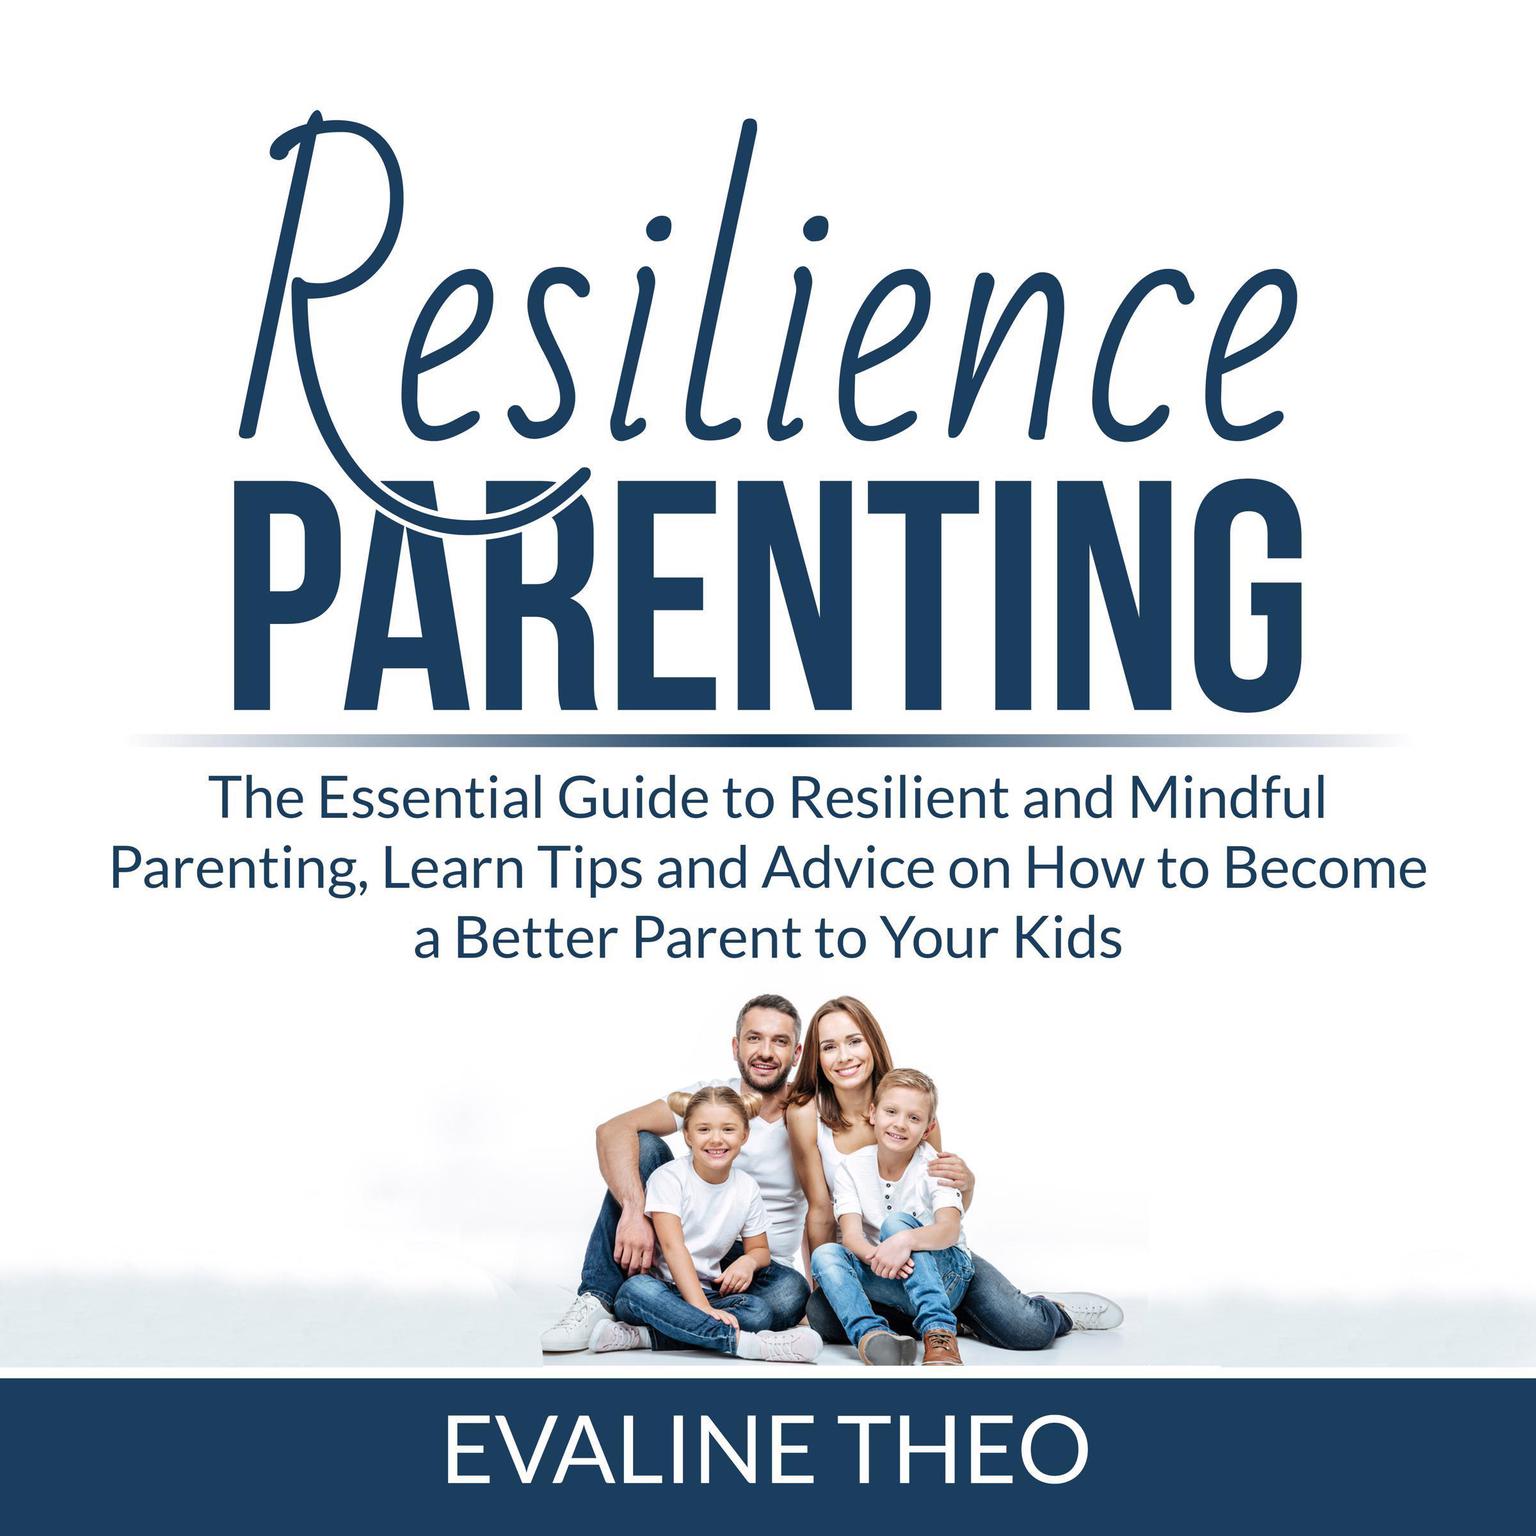 Resilience Parenting: The Essential Guide to Resilient and Mindful Parenting, Learn Tips and Advice on How to Become a Better Parent to Your Kids  Audiobook, by Evaline Theo